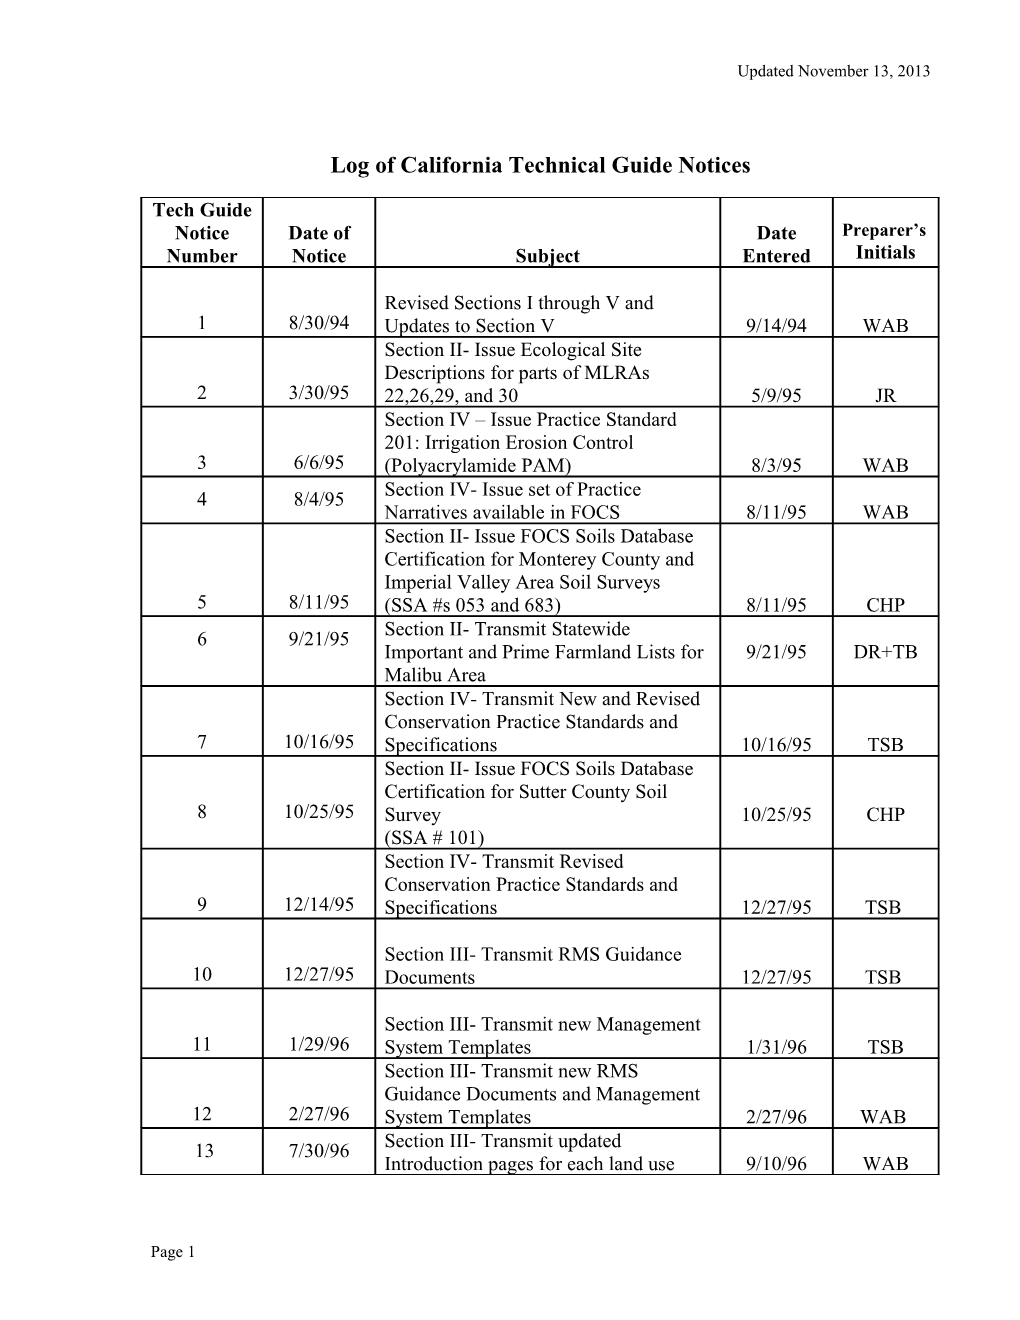 Log of California Technical Guide Notices s1